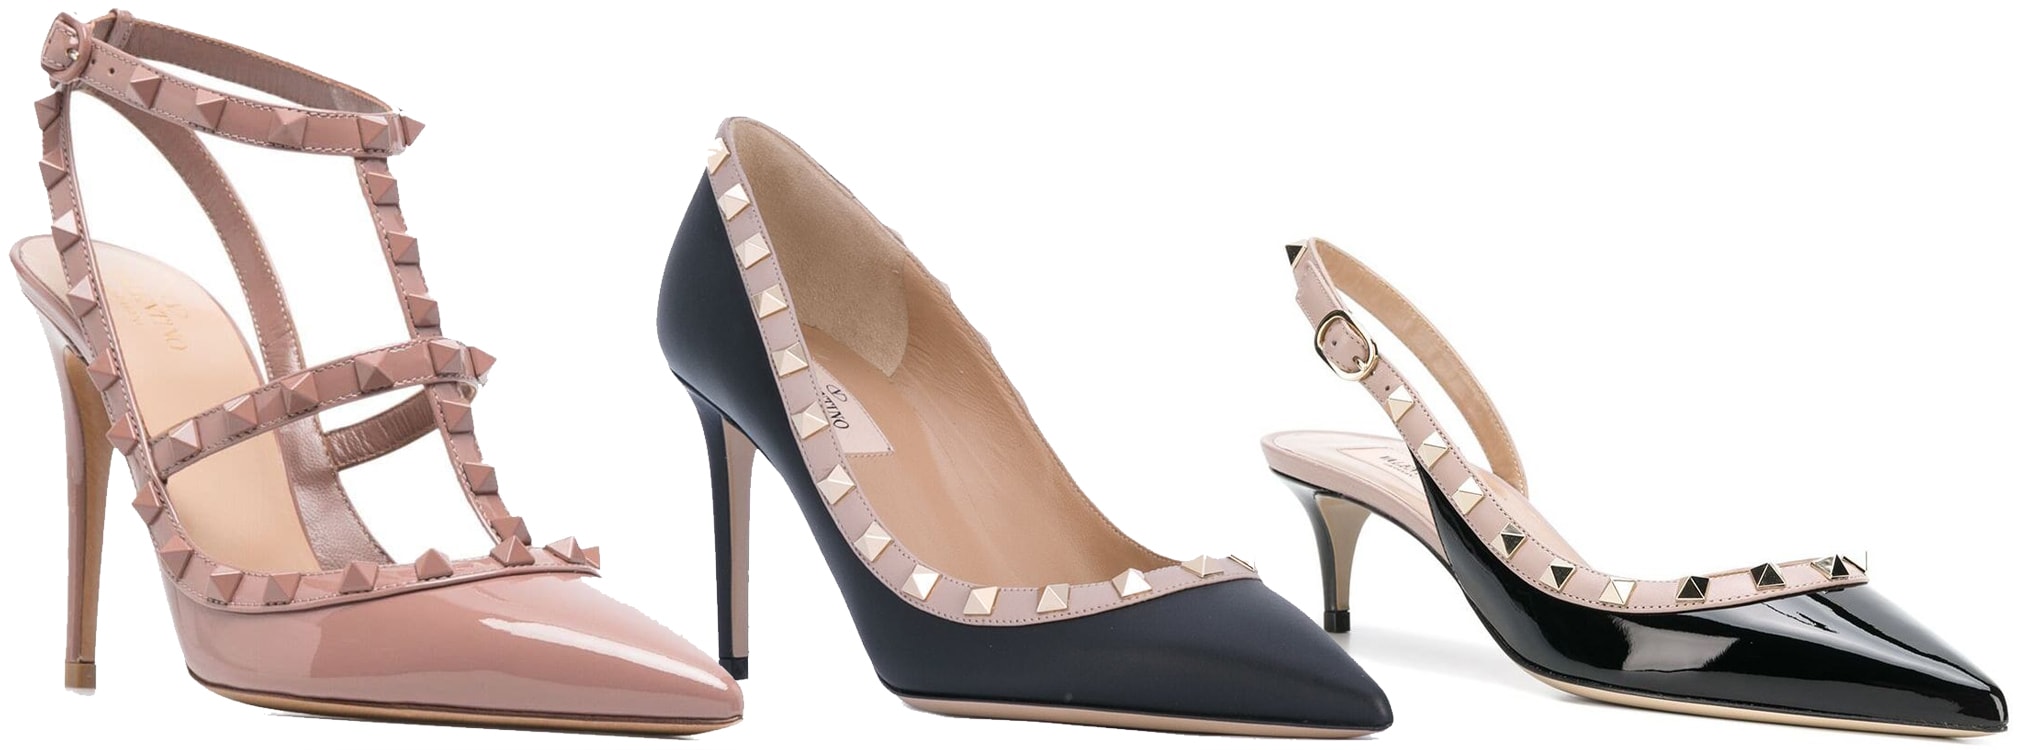 The Rockstud pump has gained a cult status since its release in 2010